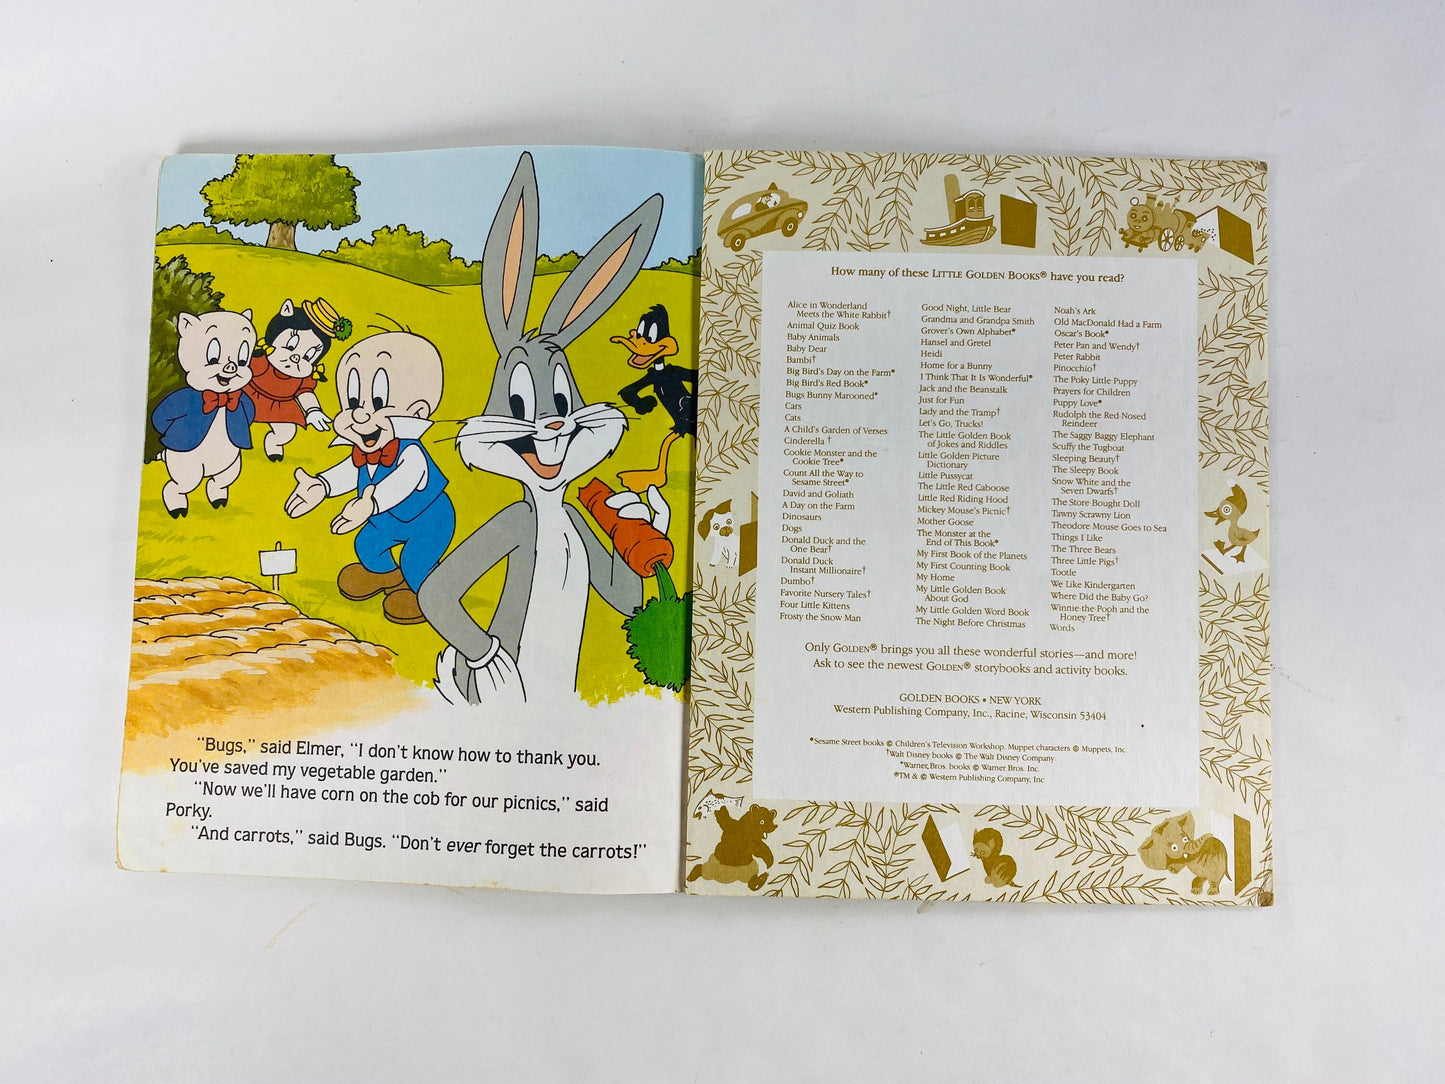 1987 Bugs Bunny and the Pink Flamingos Vintage Little Golden Book with Elmer Fudd, Porky Pig, Daffy Duck, Petunia Pig.